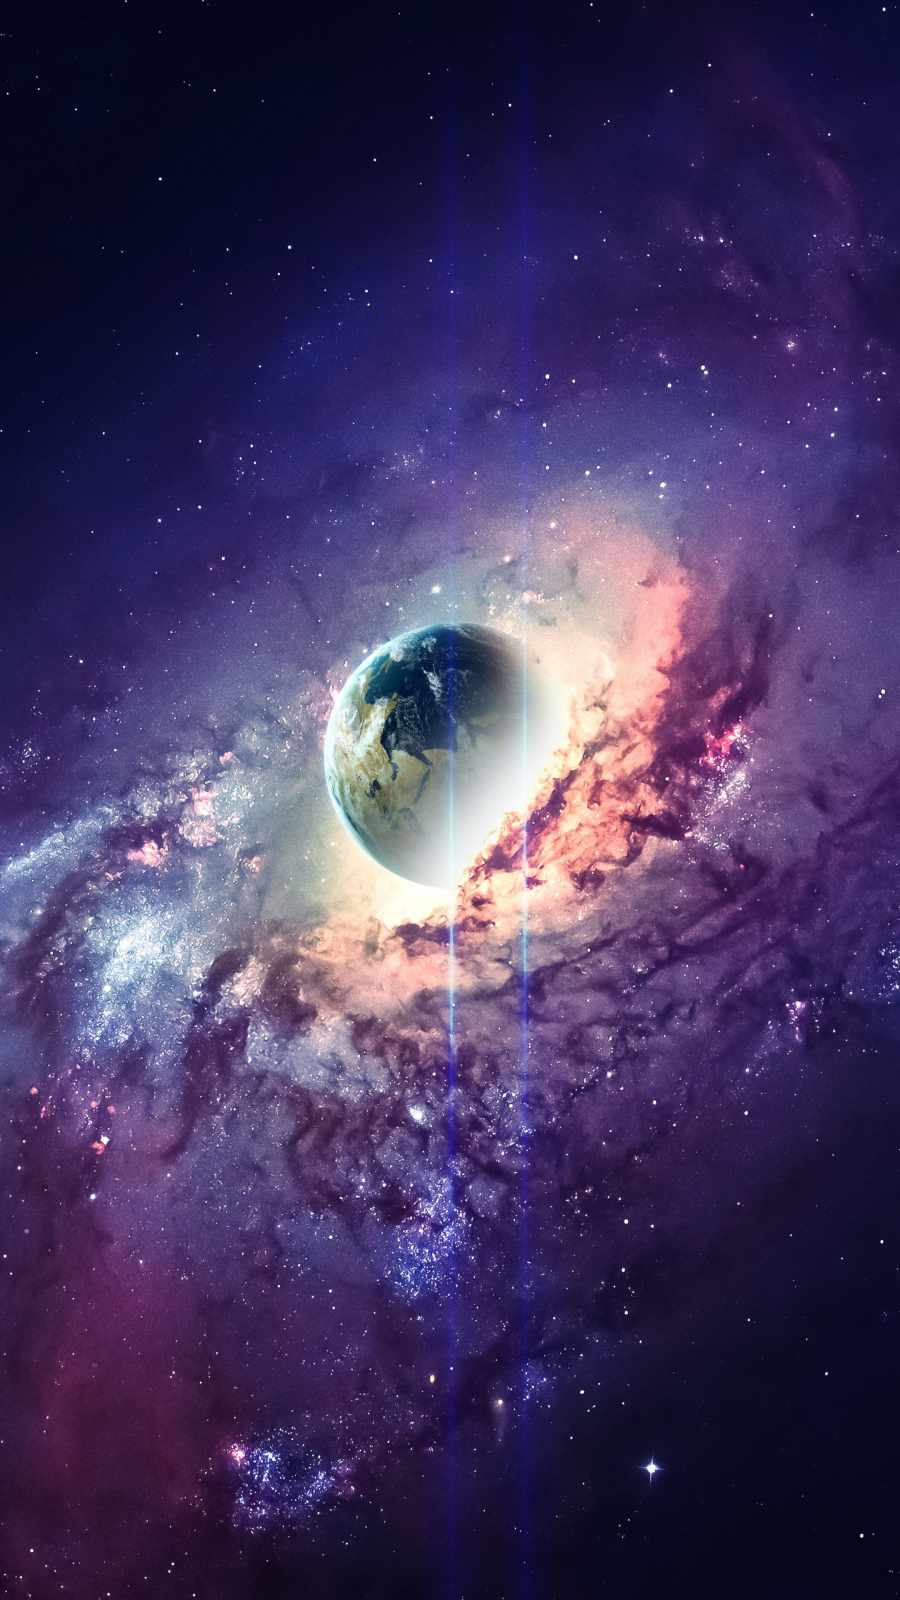 Giant Planet In Galaxy IPhone Wallpaper - IPhone Wallpapers : iPhone  Wallpapers